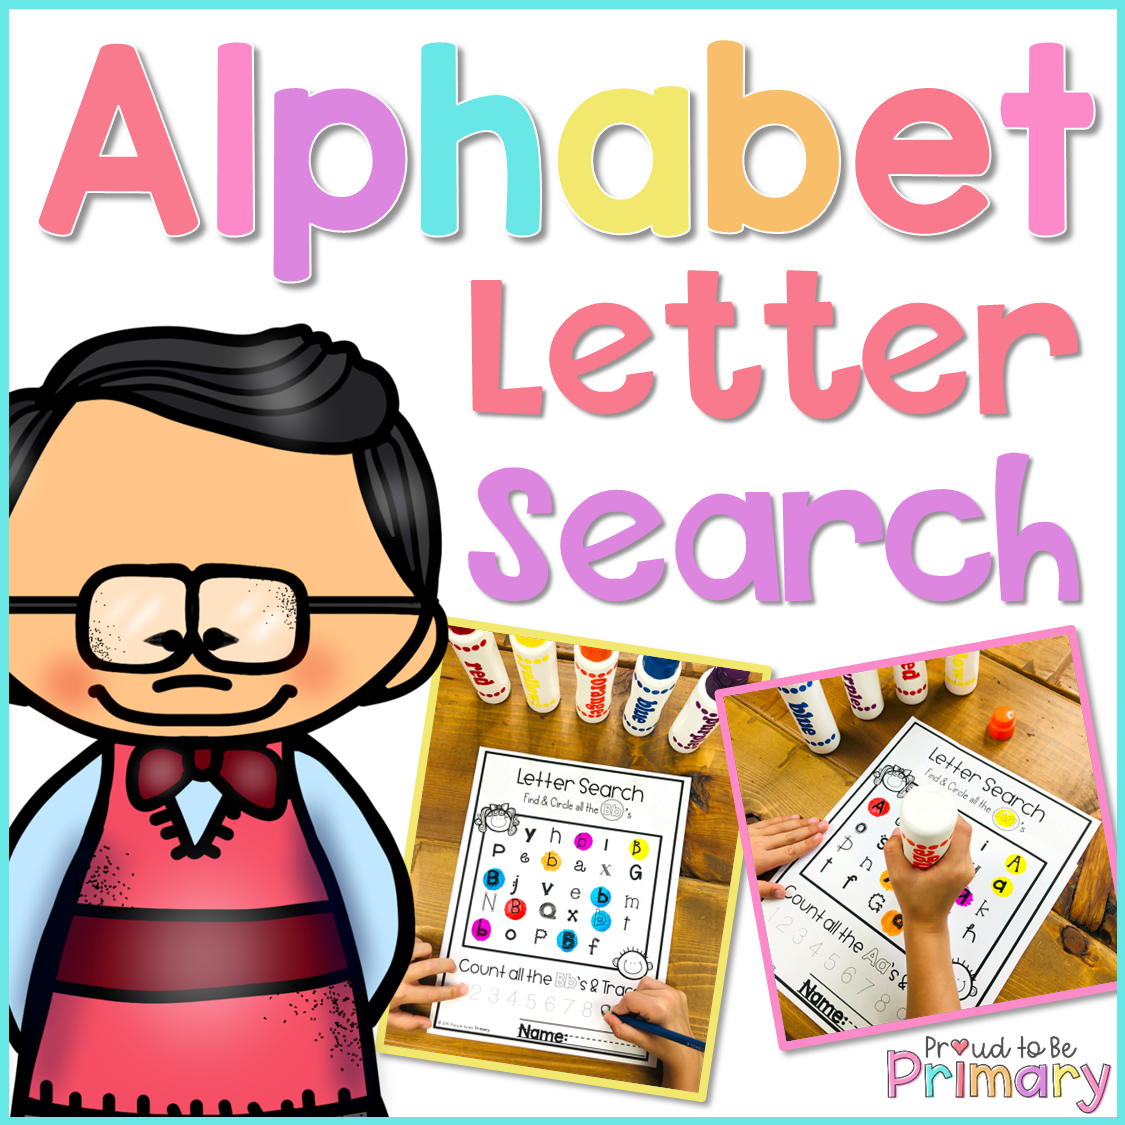 Alphabet Letter Search - Proud to be Primary